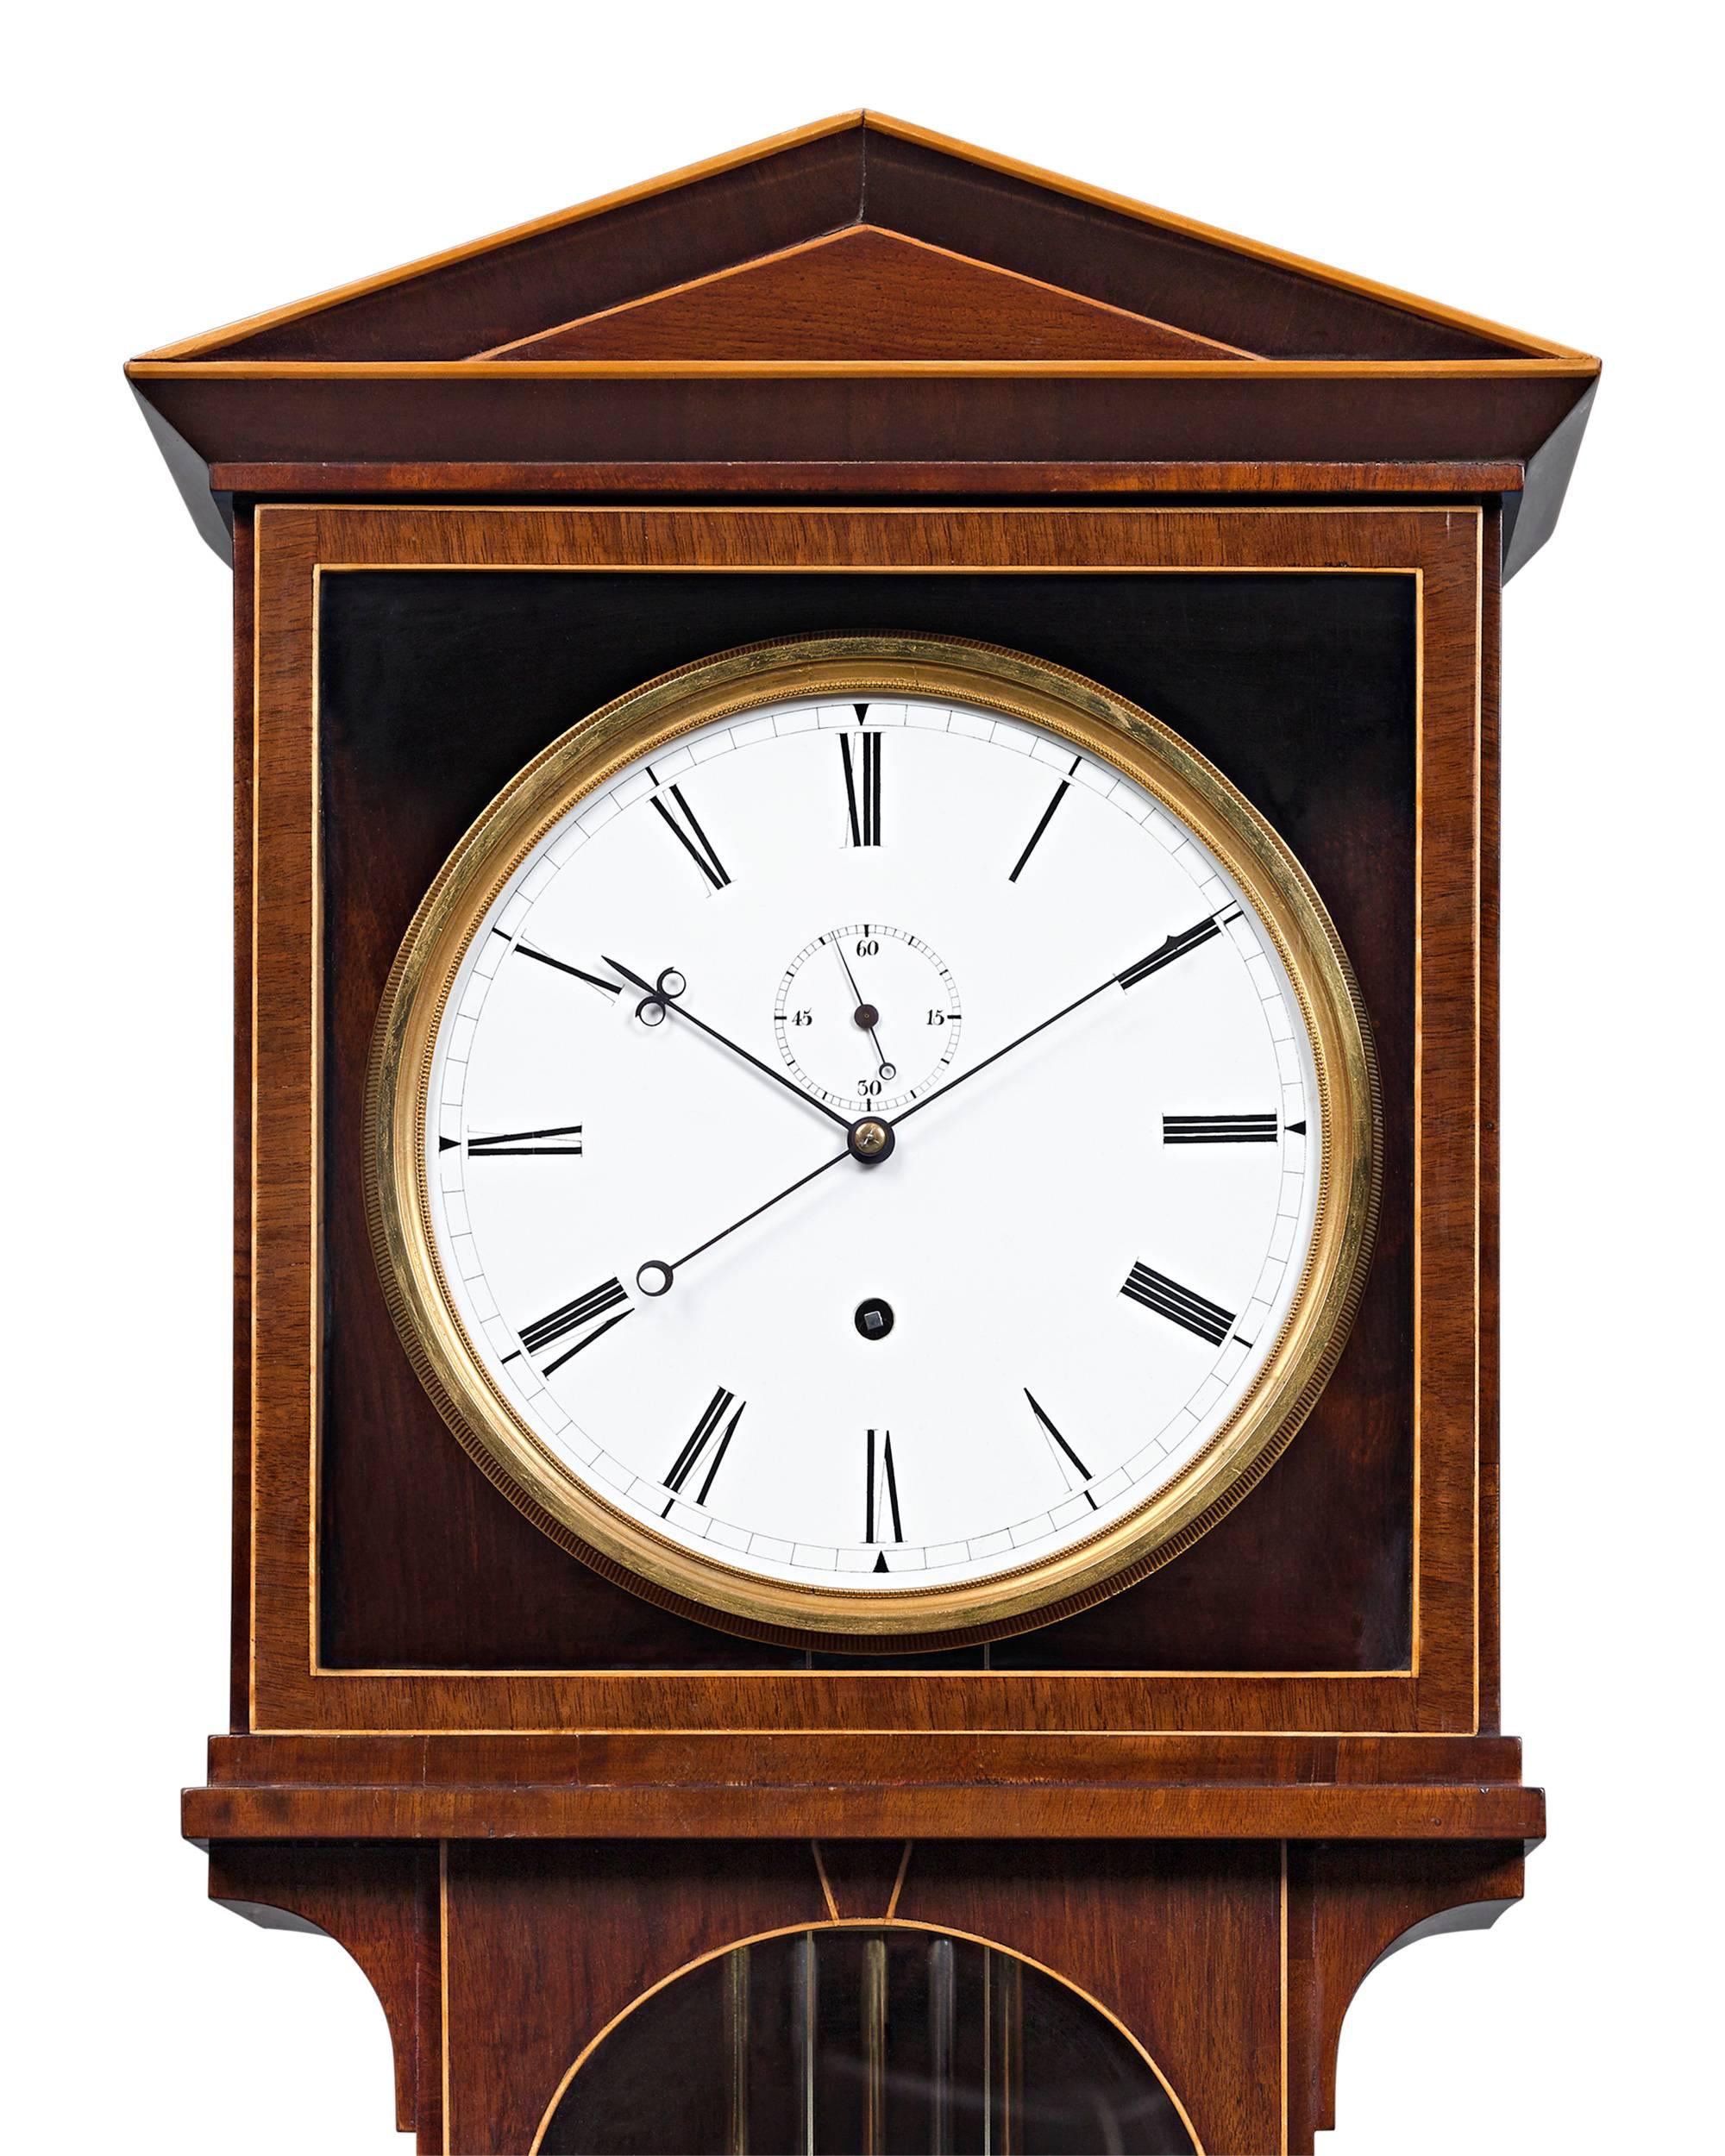 This rare Vienna regulator clock, or Laterndluhr, beautifully demonstrates the precision and superiority of Viennese craftsmanship. The elegant Empire style case, crafted from the finest mahogany with delicate maple inlay, houses a weight driven